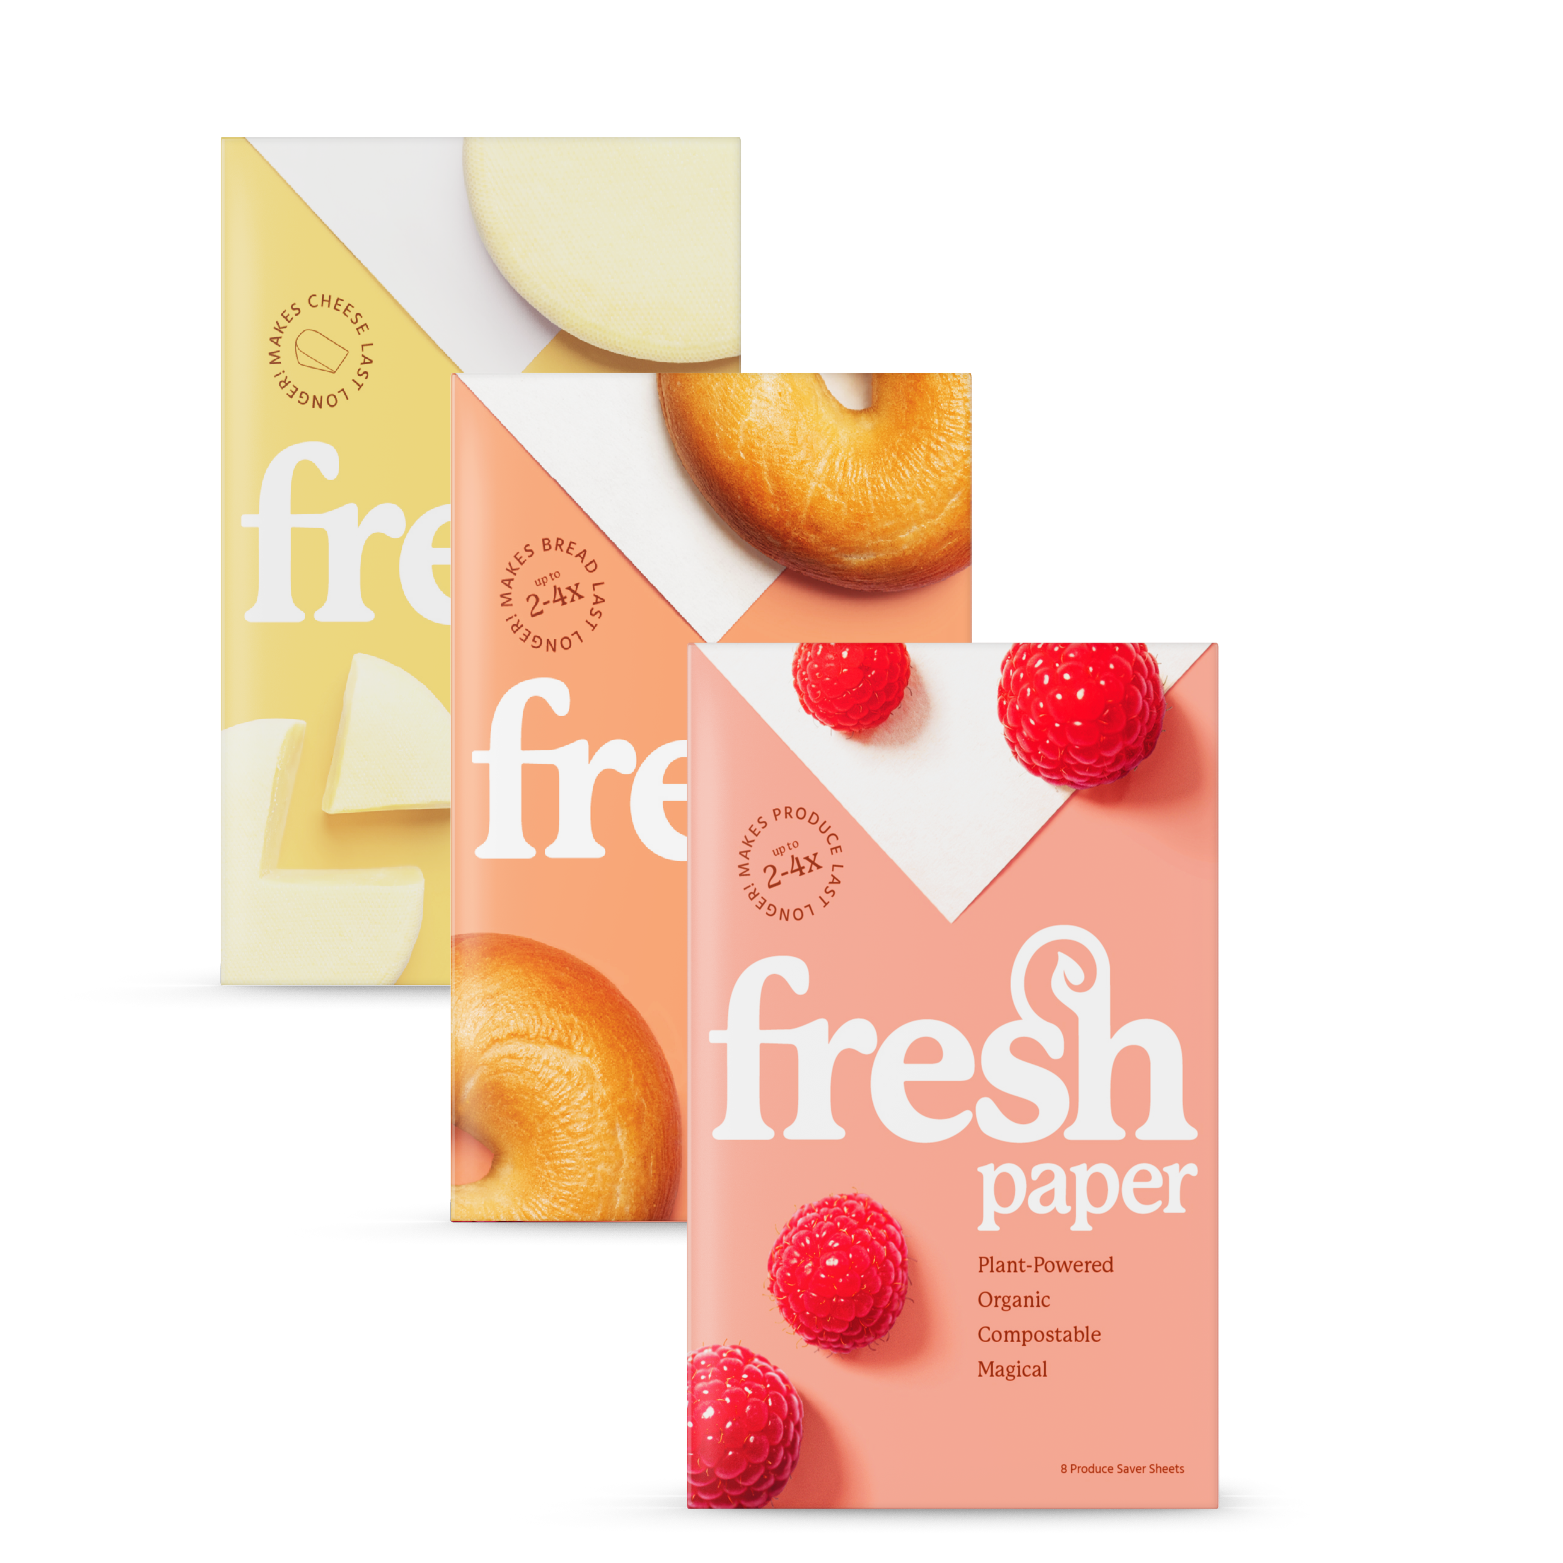 Fresh Idea: The Unlikely Inspiration Behind Food-Saver FreshPaper